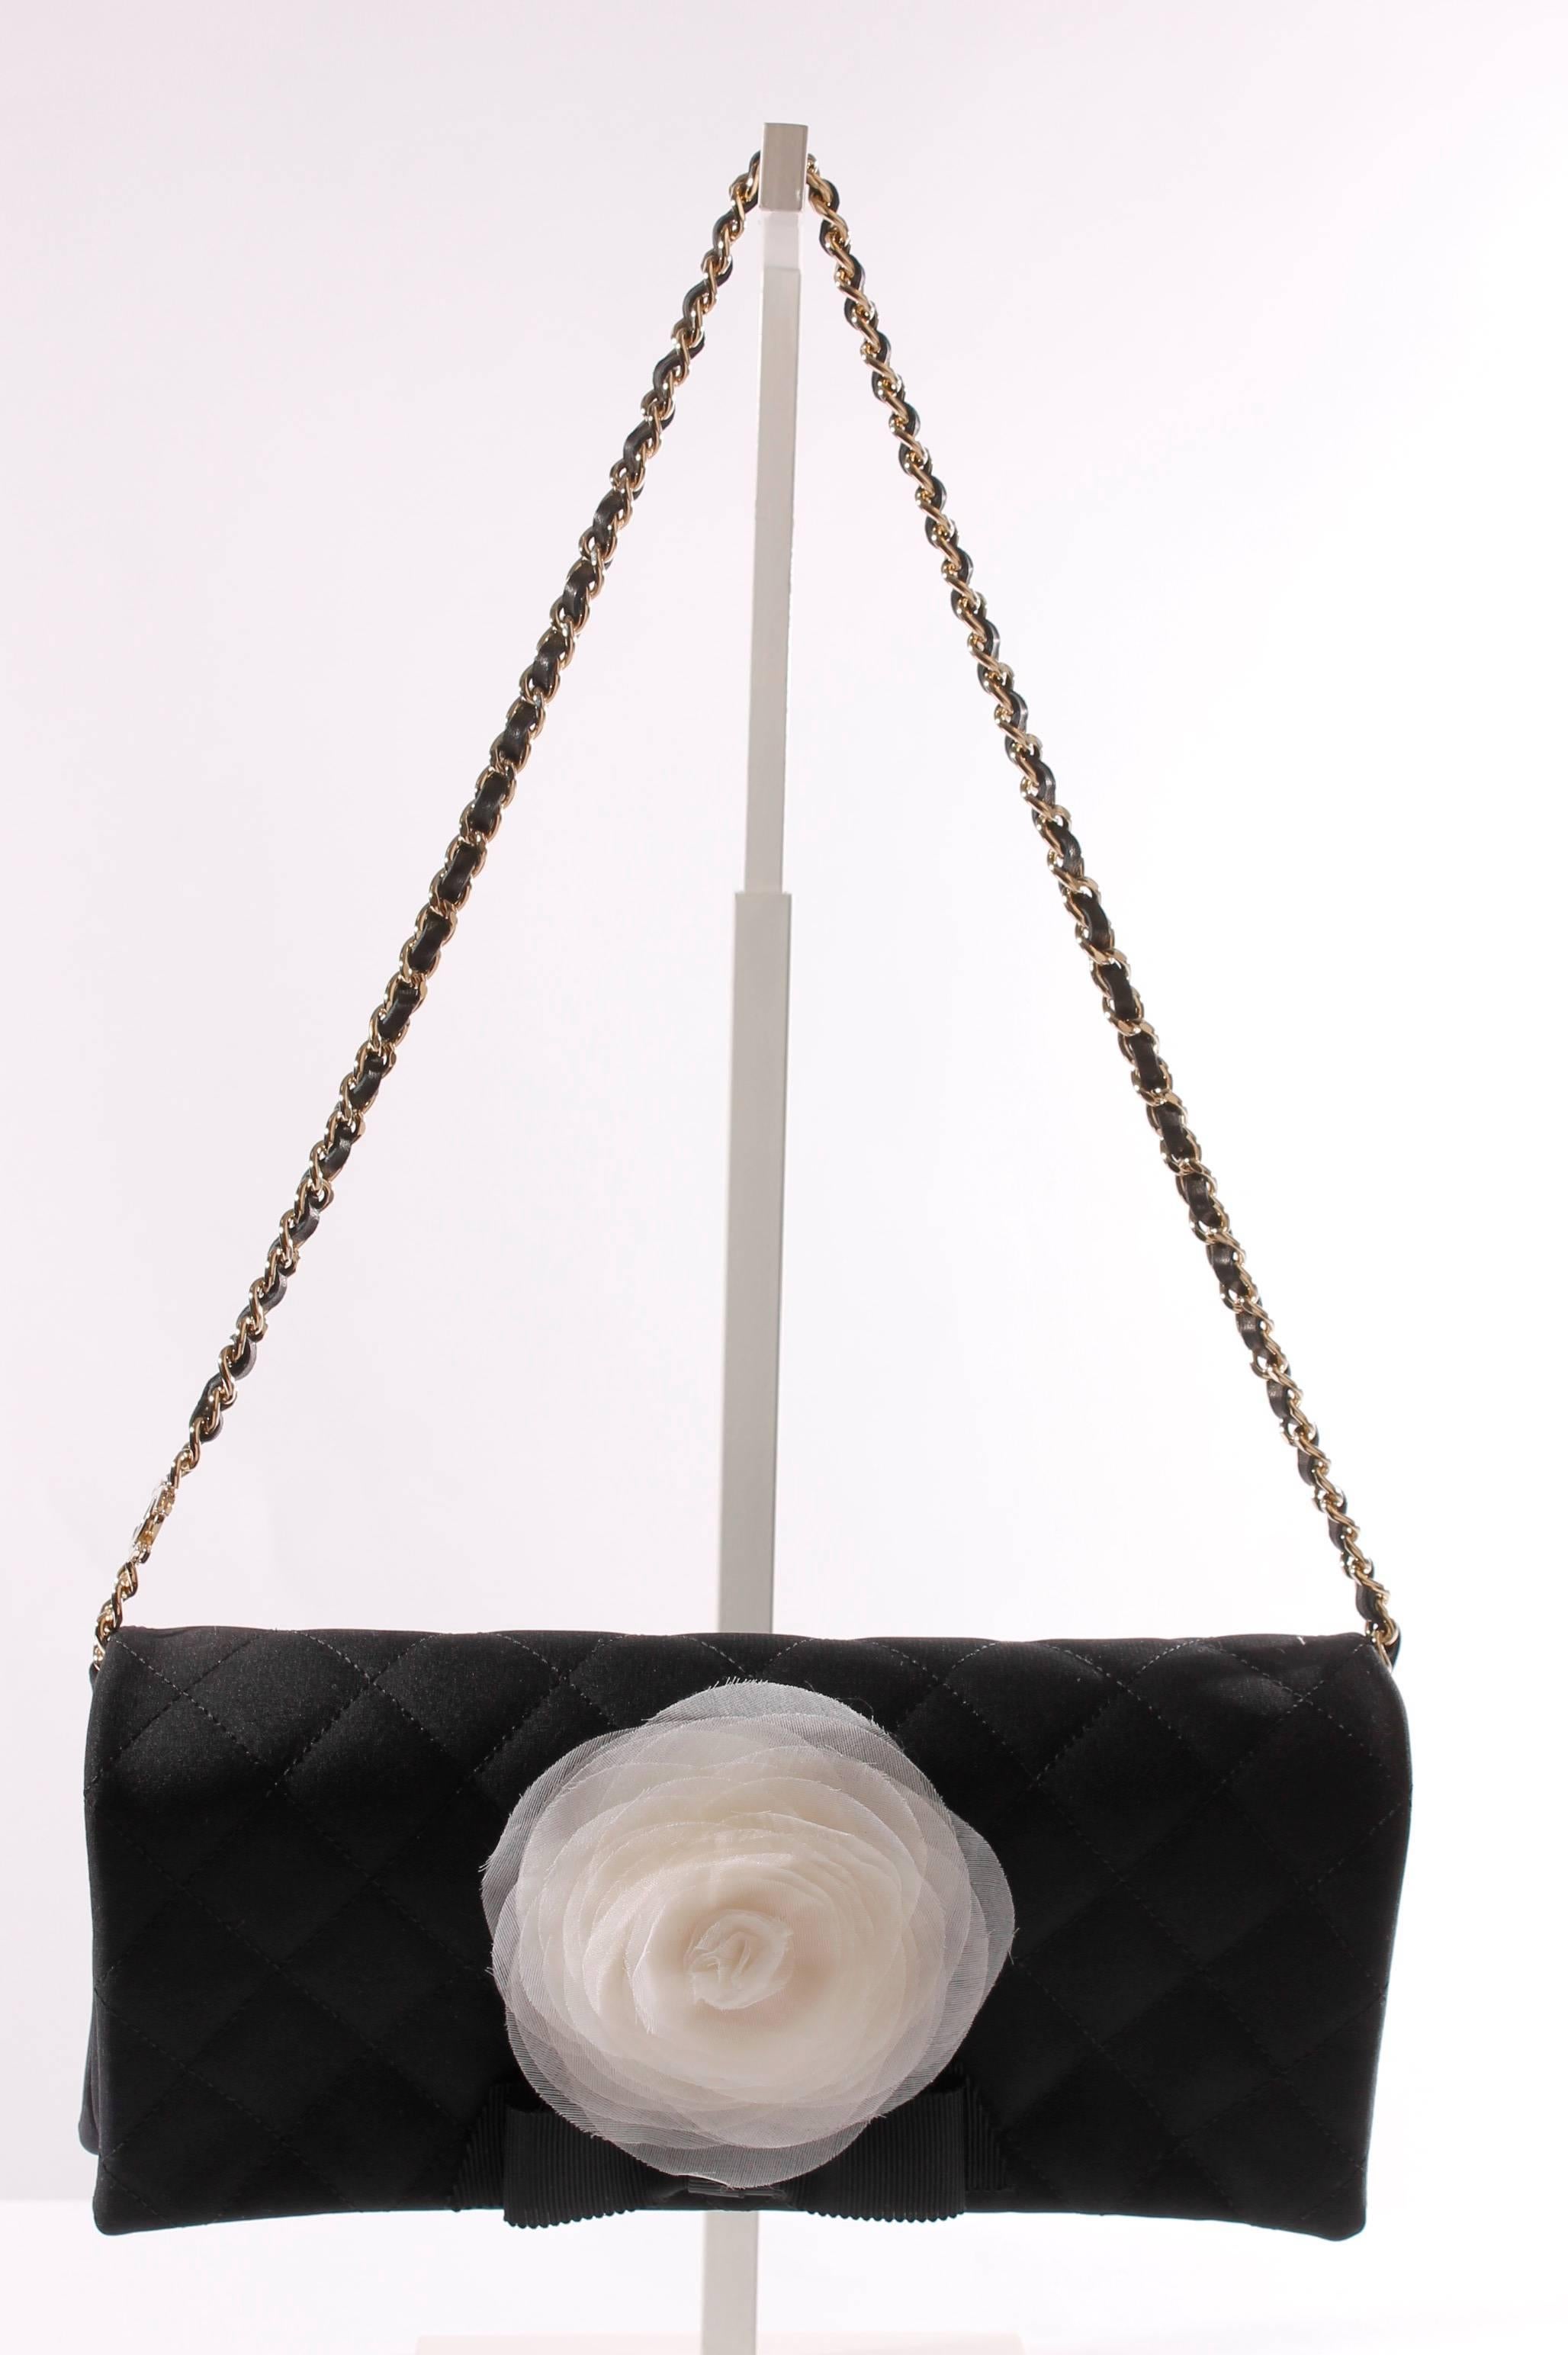 
Ooooh la la! This is true beauty! A wonderful and exquisite evening clutch by Chanel in matte black satin with a white chiffon camellia flower. Underneath the flower a black bow is attached.

This cuty is entirely quilted, accept for the sides. An